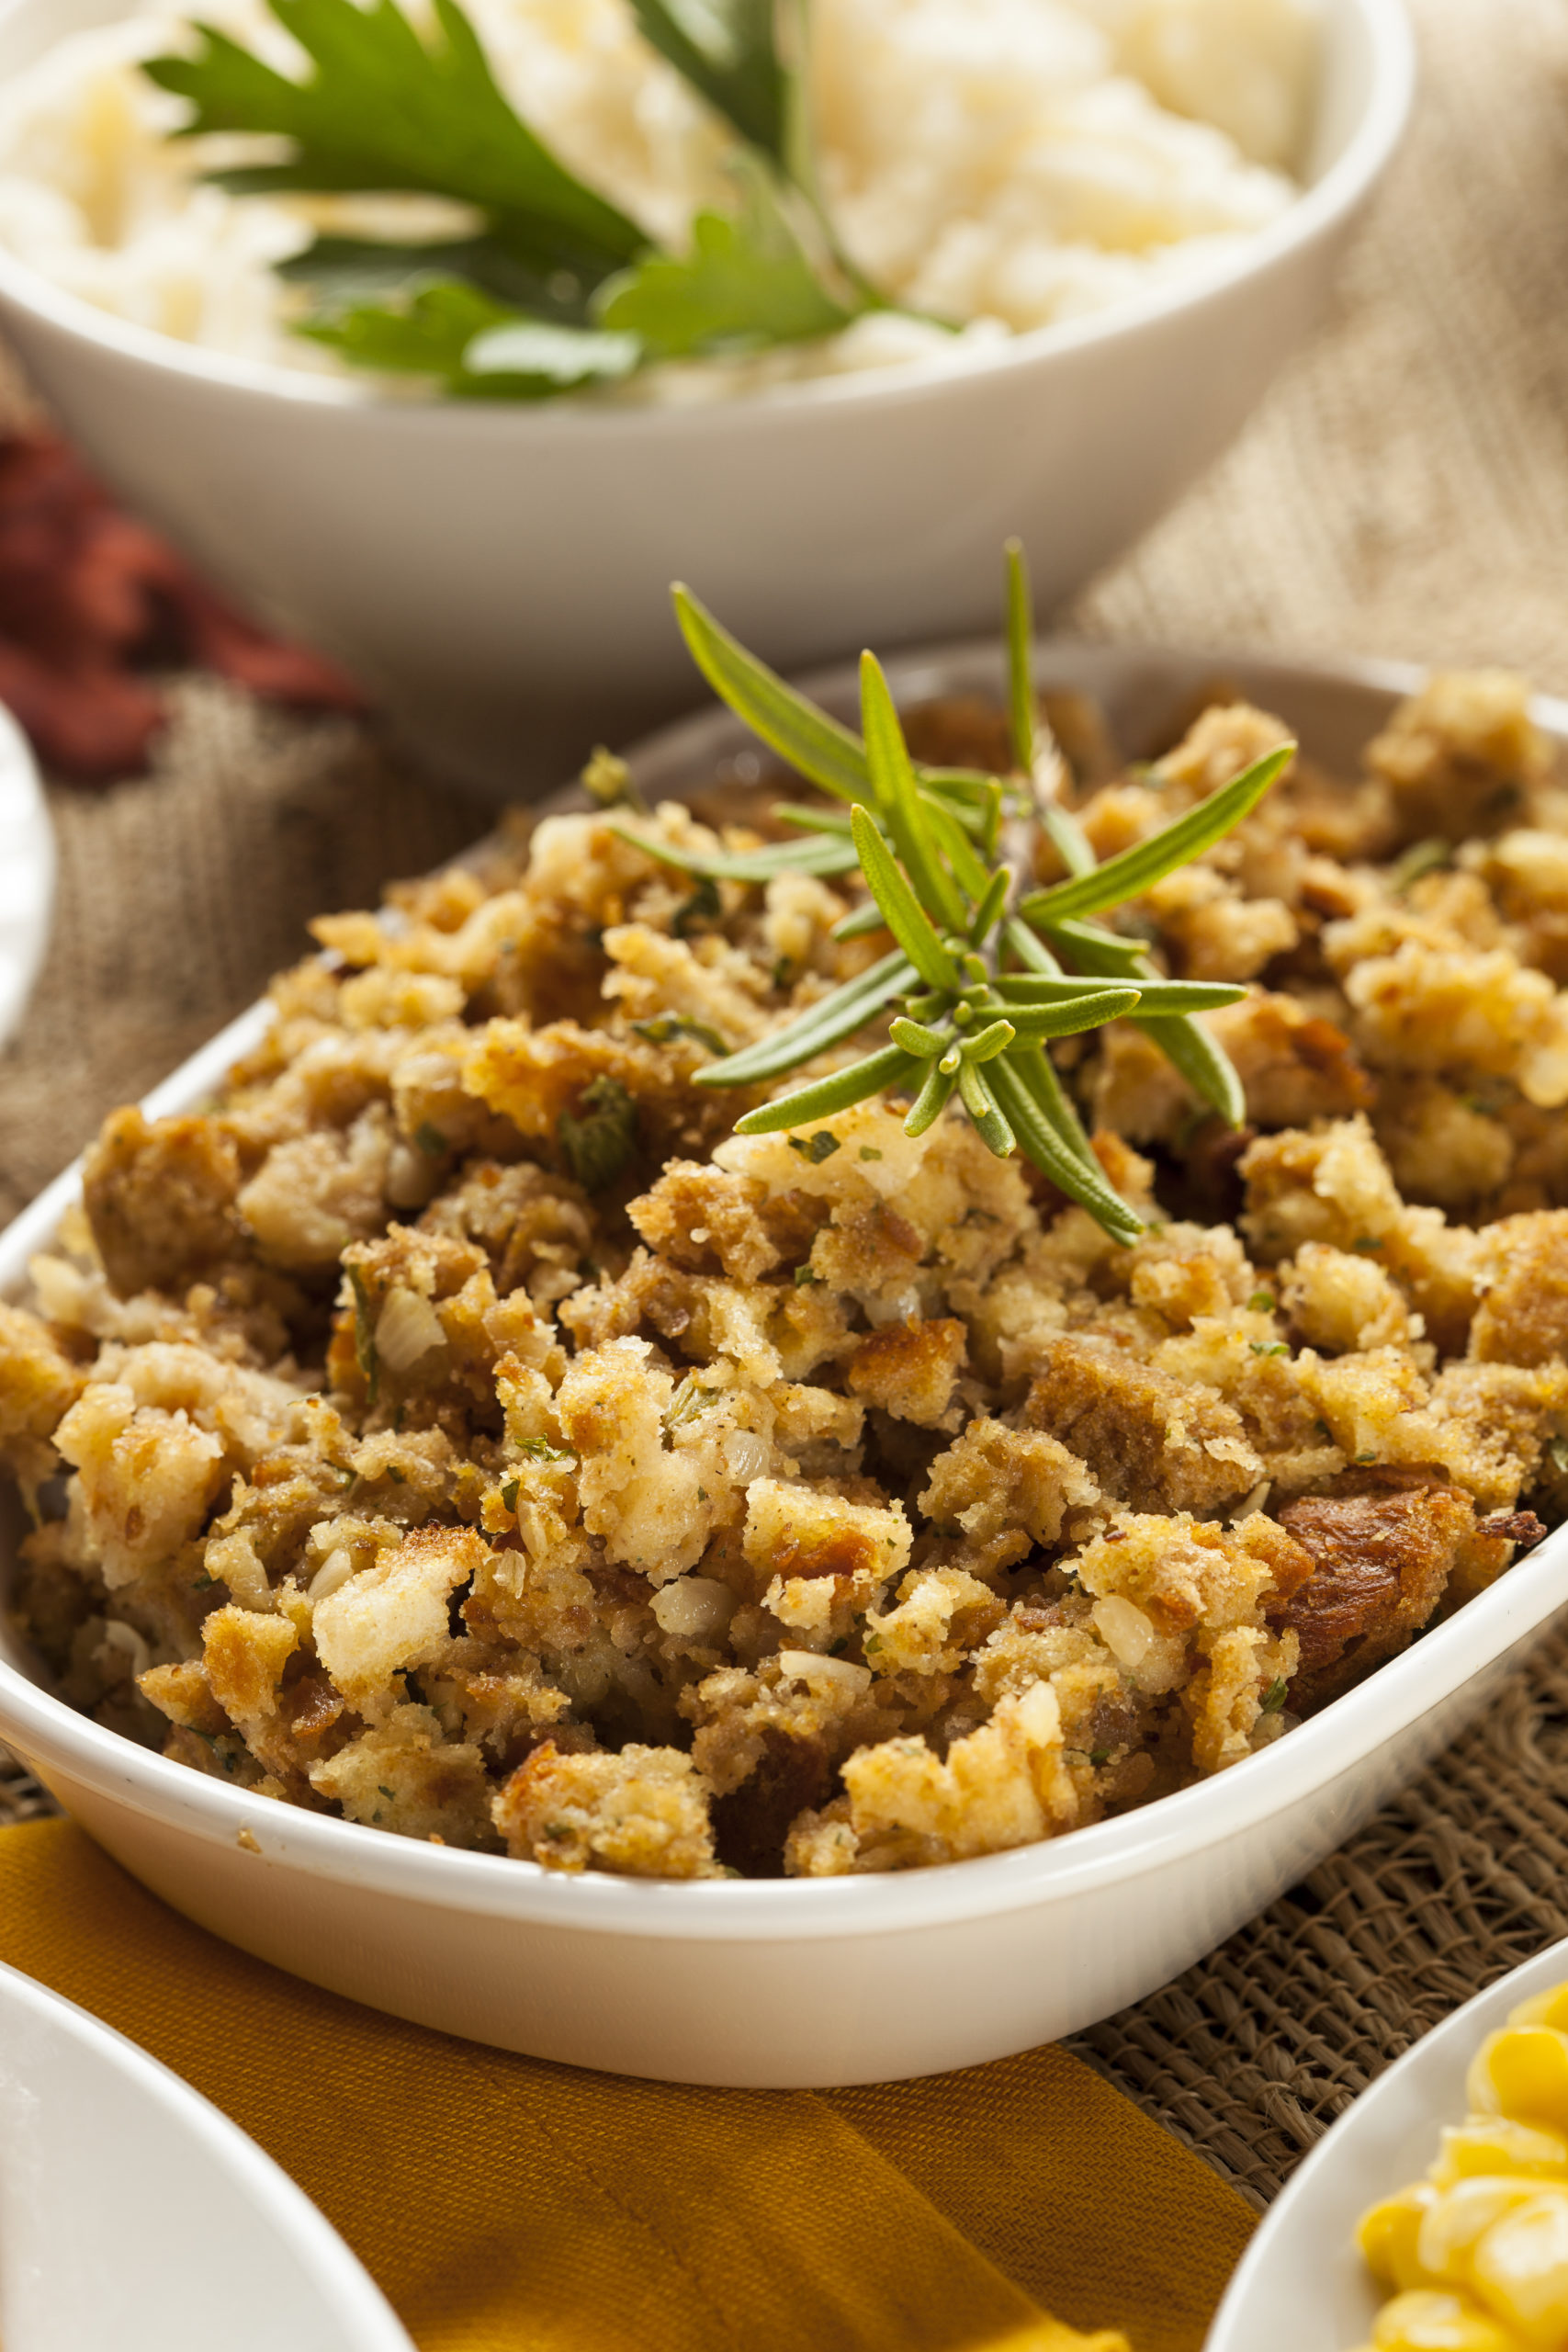 The Best Store Bought Stuffing to Buy